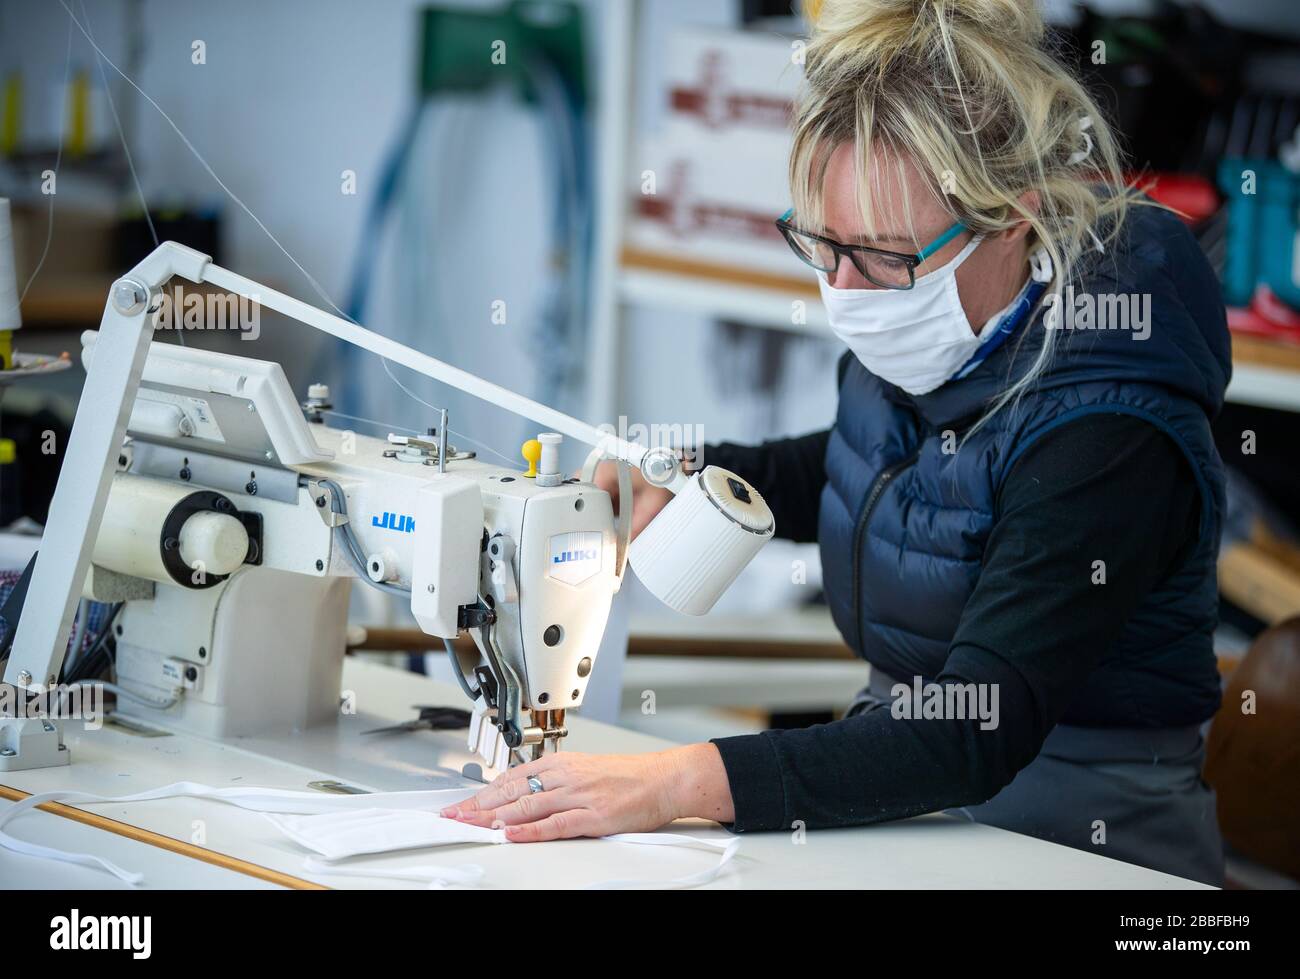 Wendisch Waren, Germany. 31st Mar, 2020. Employee Daniela Grunow sews masks for protection against corona viruses in the Ber-Bek company. The company normally produces chef's jackets and clothing for restaurant kitchens and switched production to protective masks a few days ago. Masks of different sizes and colours are sewn according to customer orders. Credit: Jens Büttner/dpa-Zentralbild/dpa/Alamy Live News Stock Photo